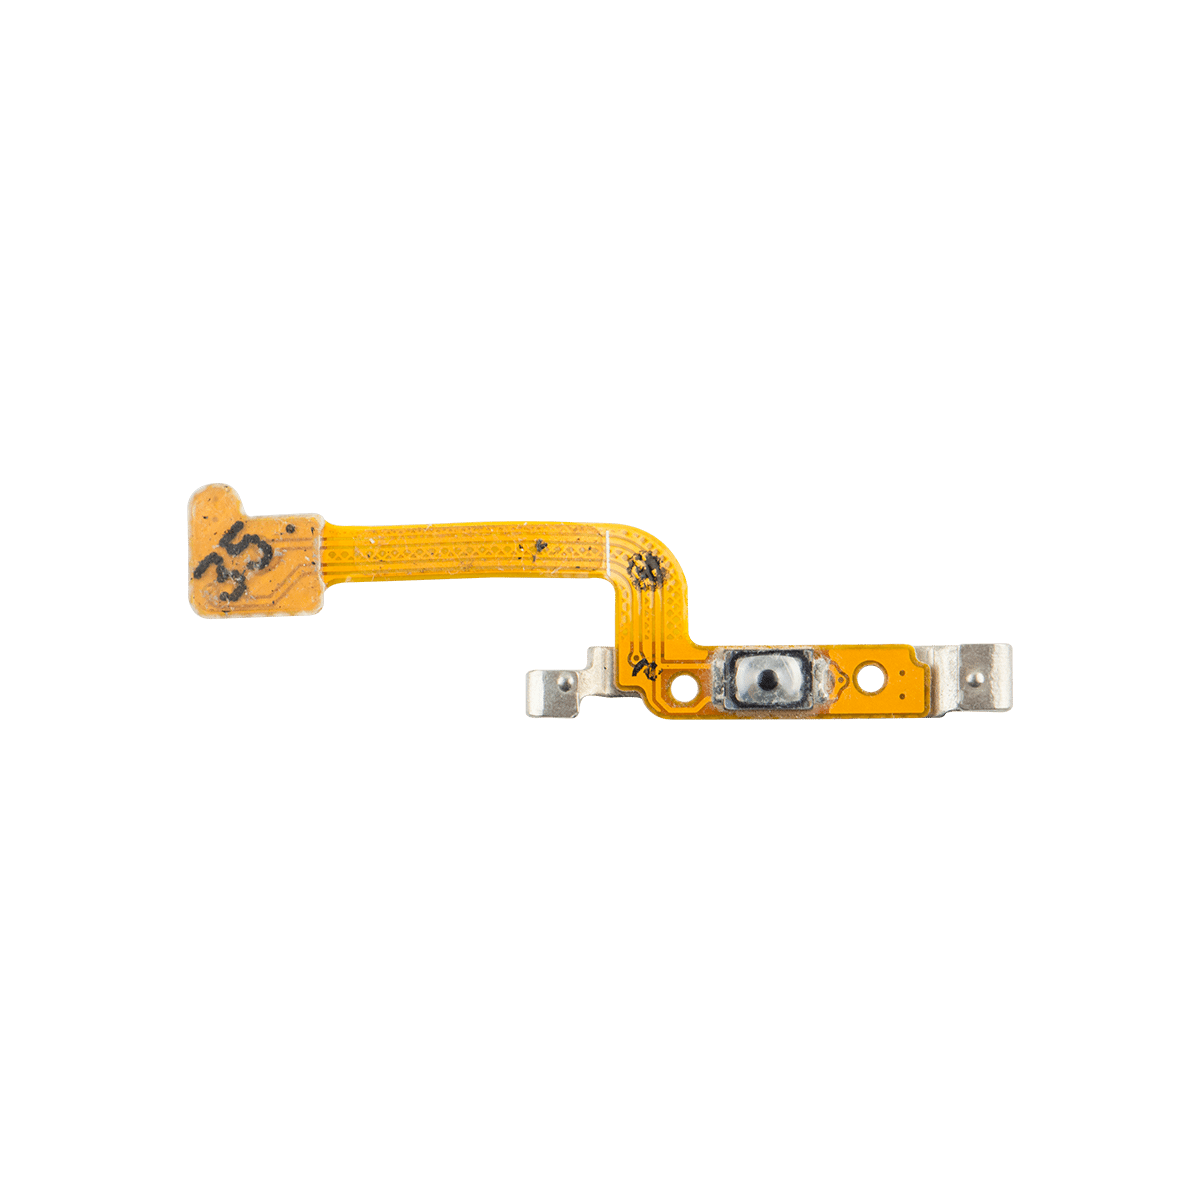 Samsung Galaxy S6 Power Button Flex Cable Replacement